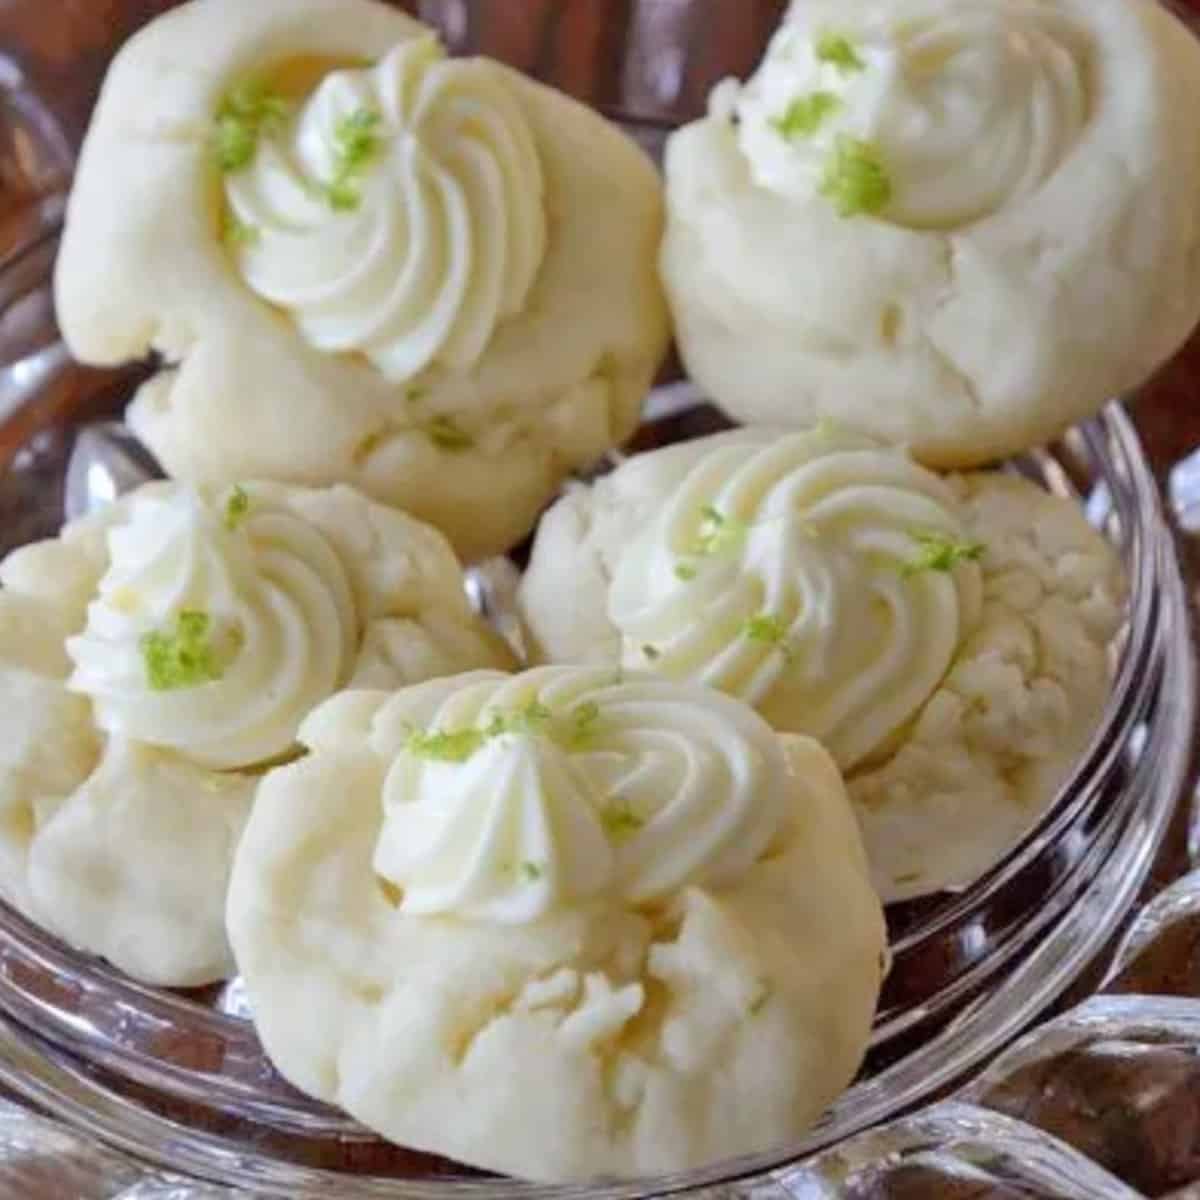 A platter full of white shortbread cookies topped with cream cheese and lime zest.